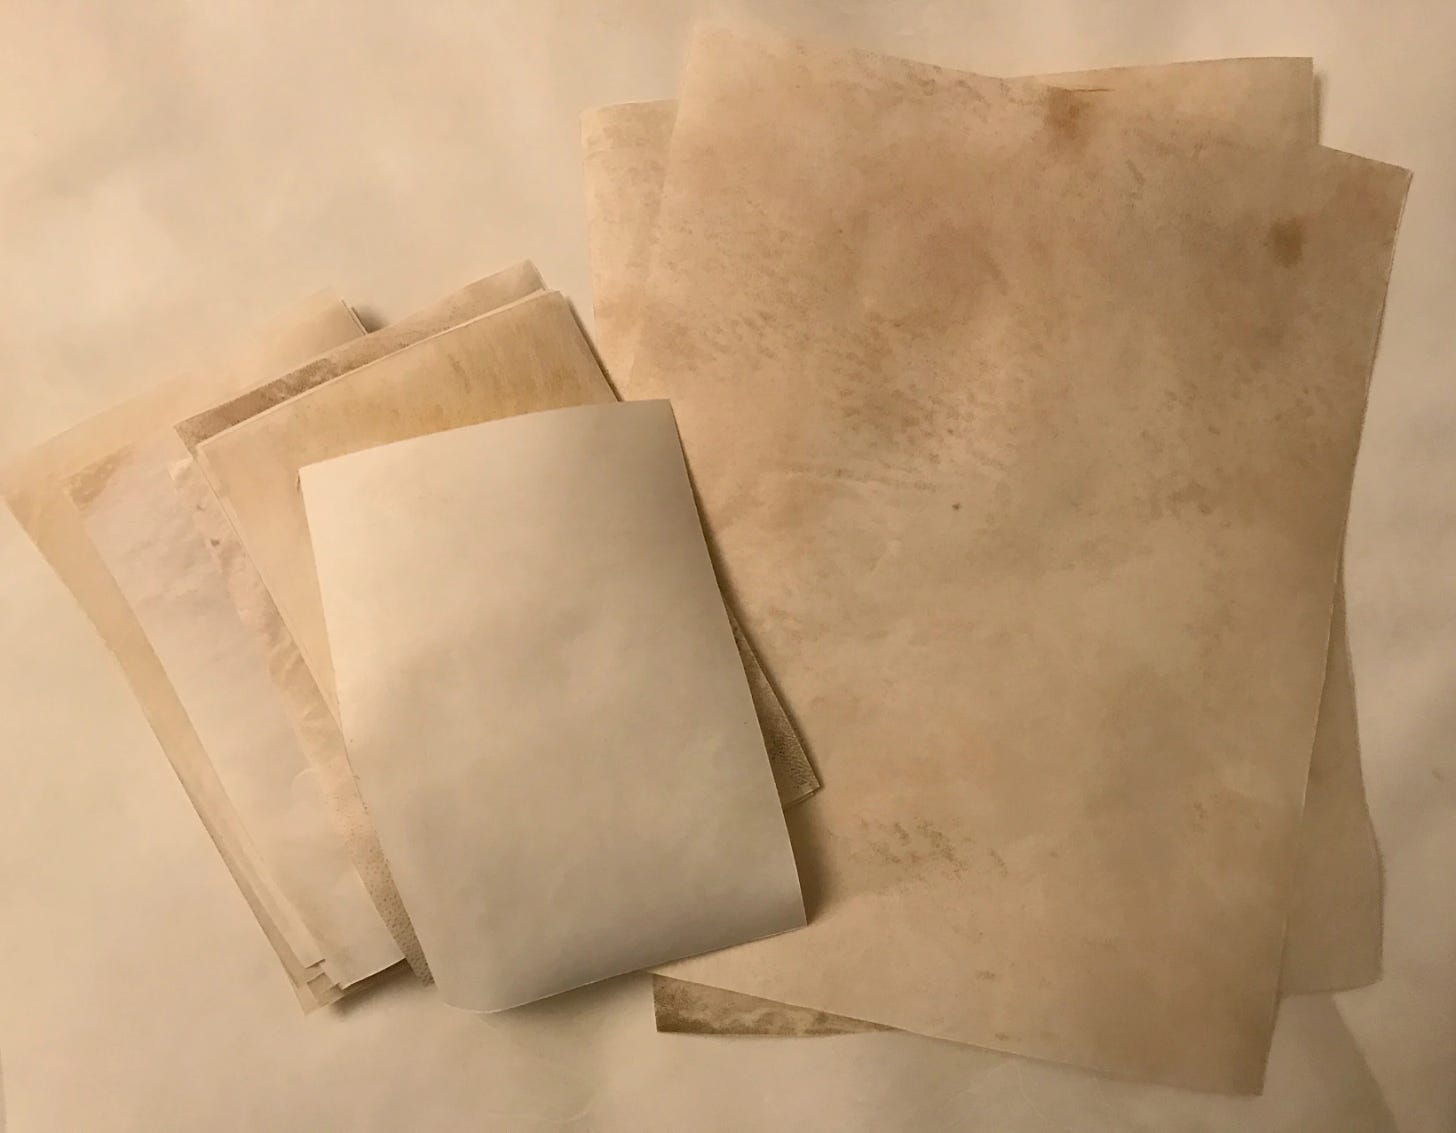 several sheets of parchment of various sizes, with natural variation in shades, too, from ivory to light tan.